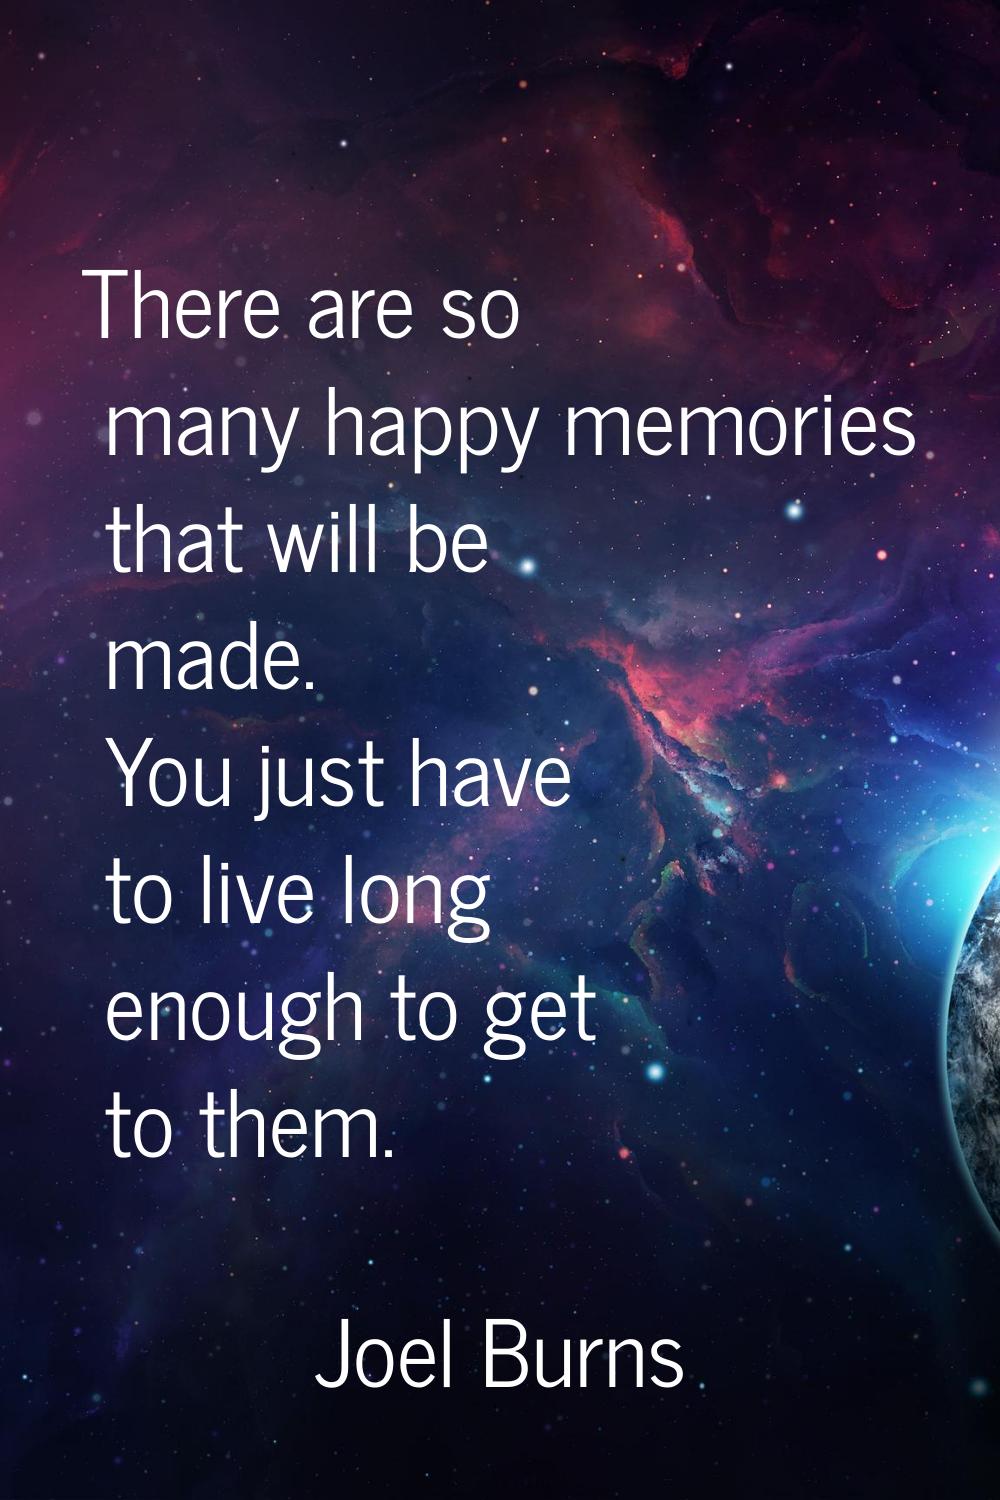 There are so many happy memories that will be made. You just have to live long enough to get to the